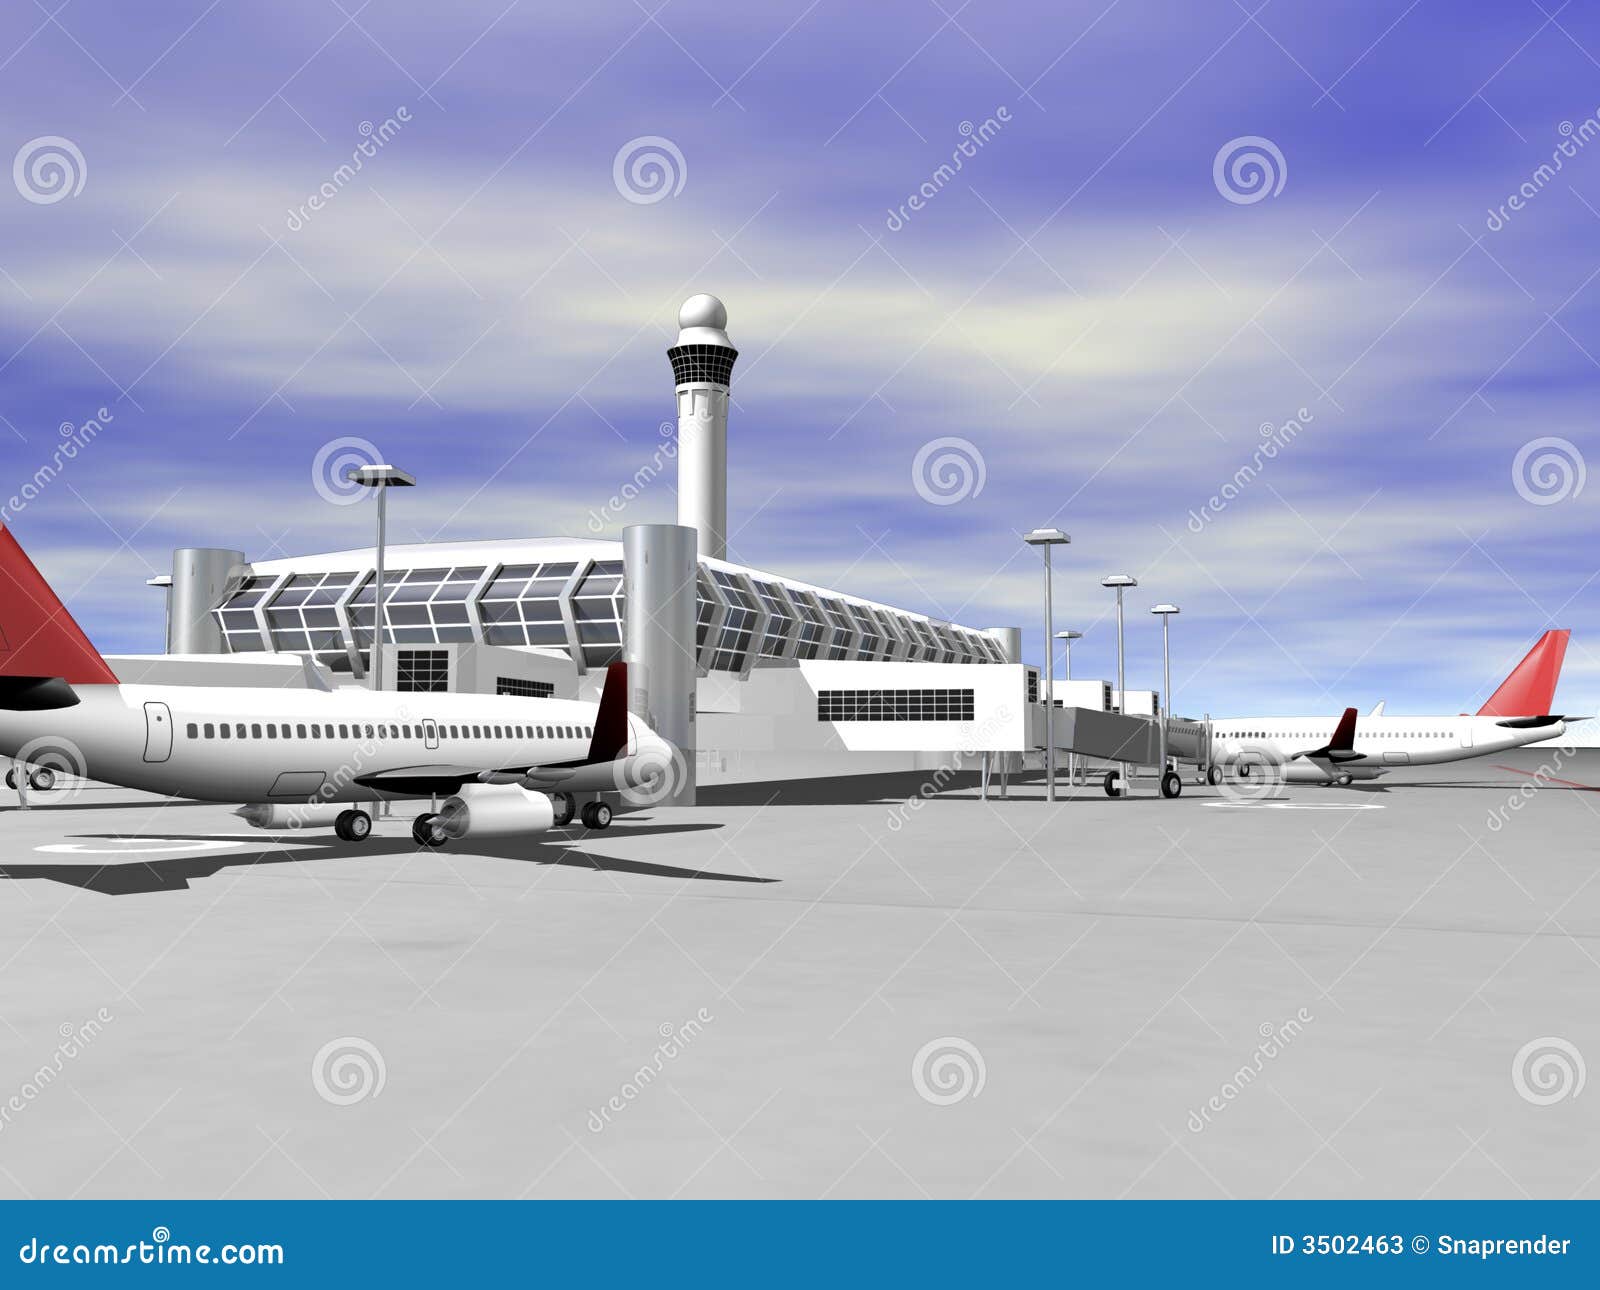 airport clip art pictures - photo #26